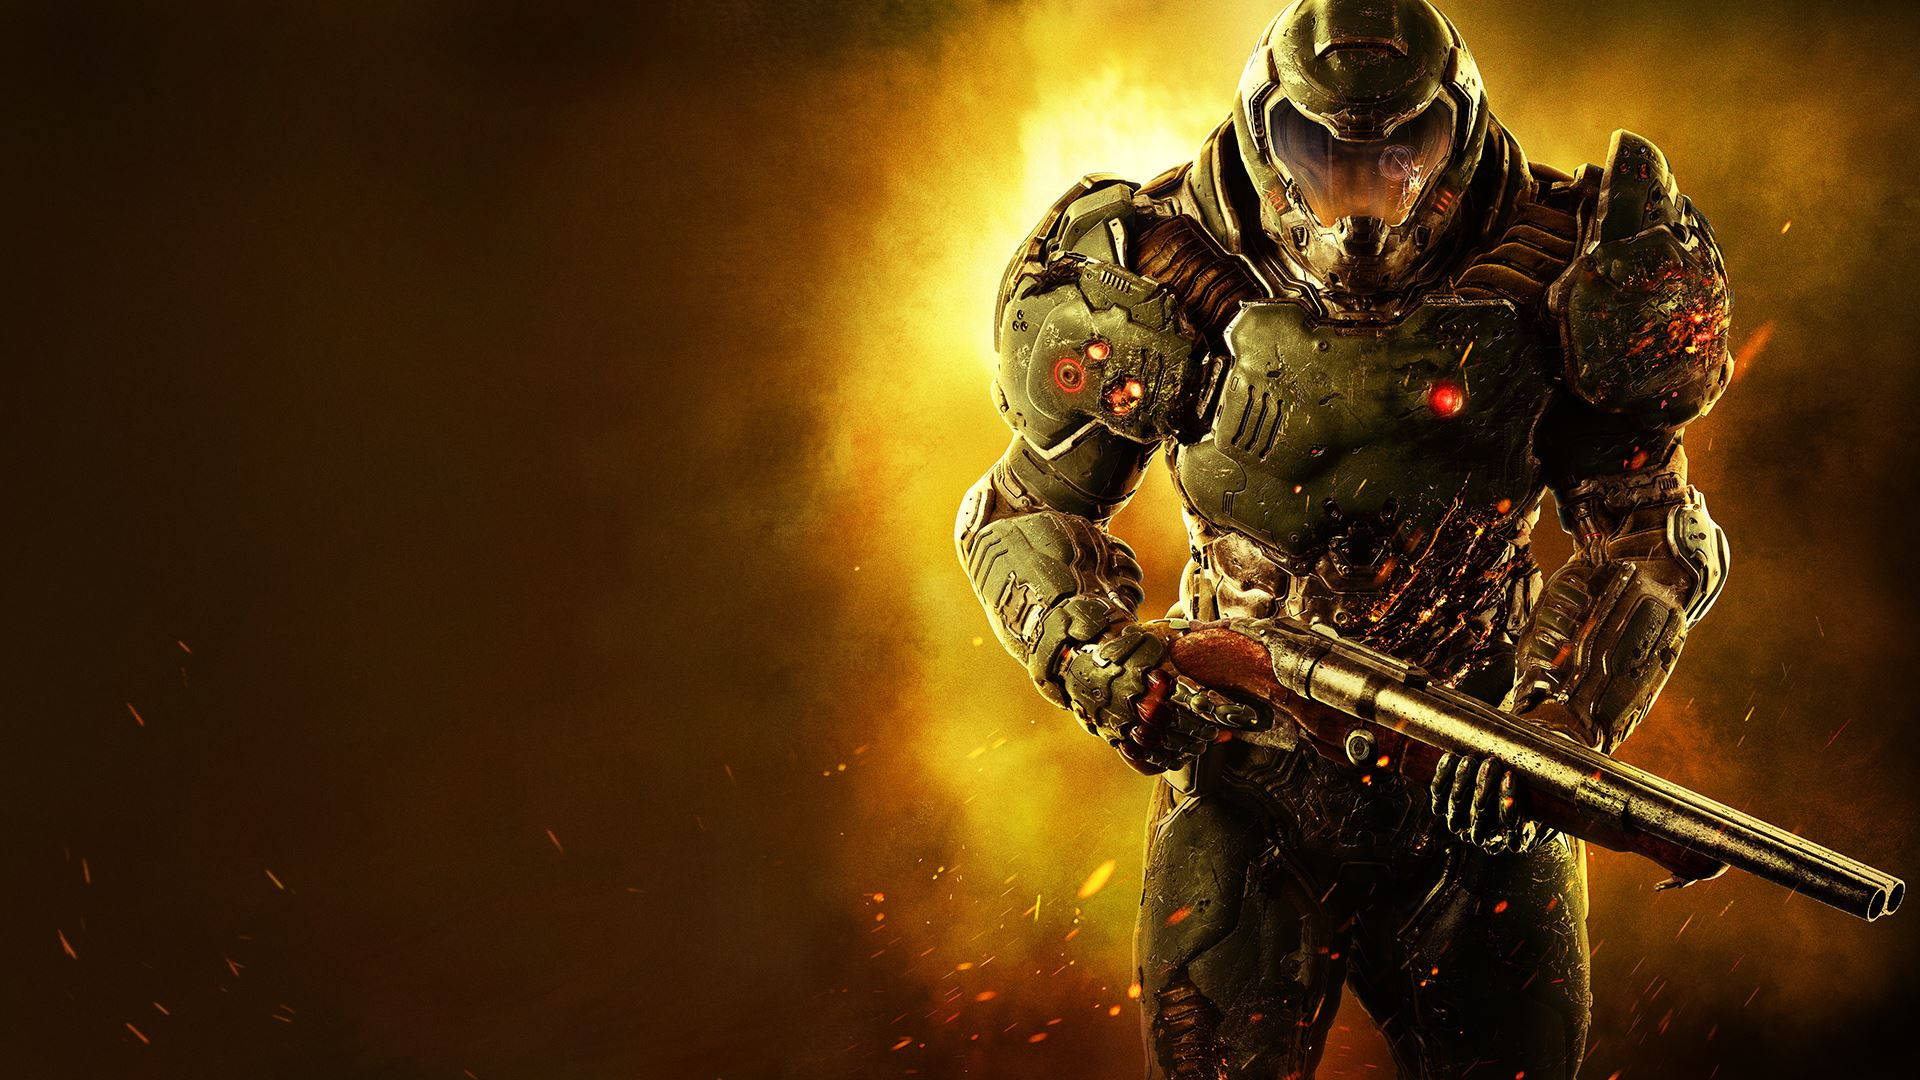 Take on the role of an unstoppable force of destruction in DOOM Wallpaper